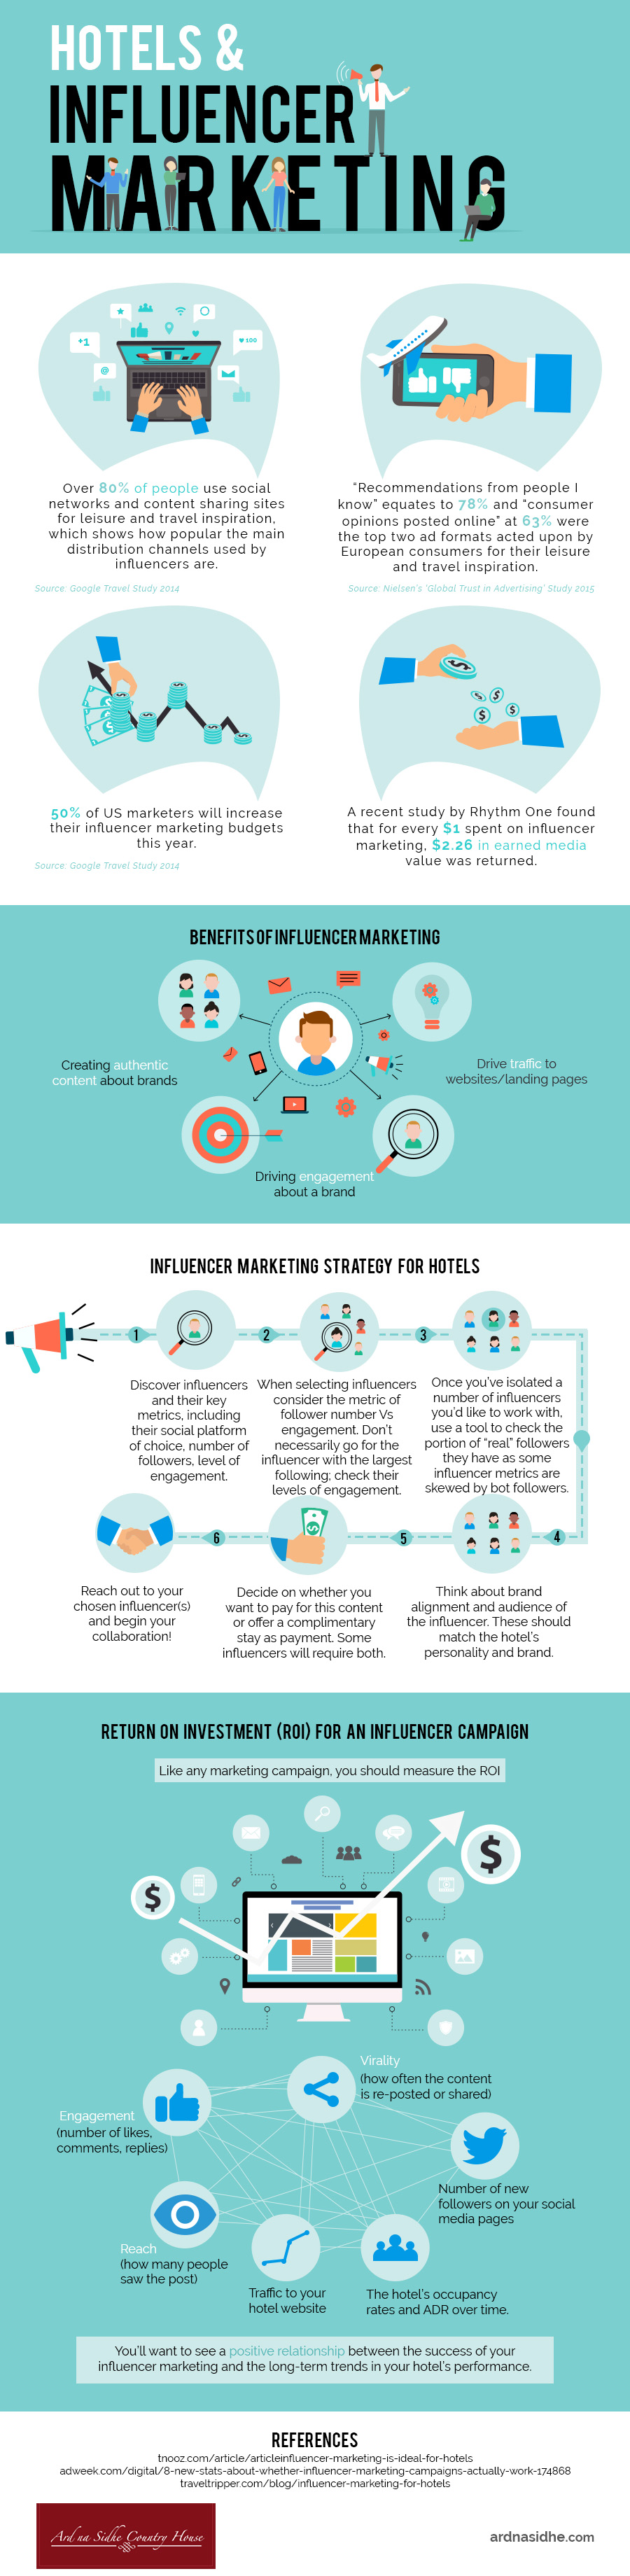 Hotels & Influencer Marketing – Infographic